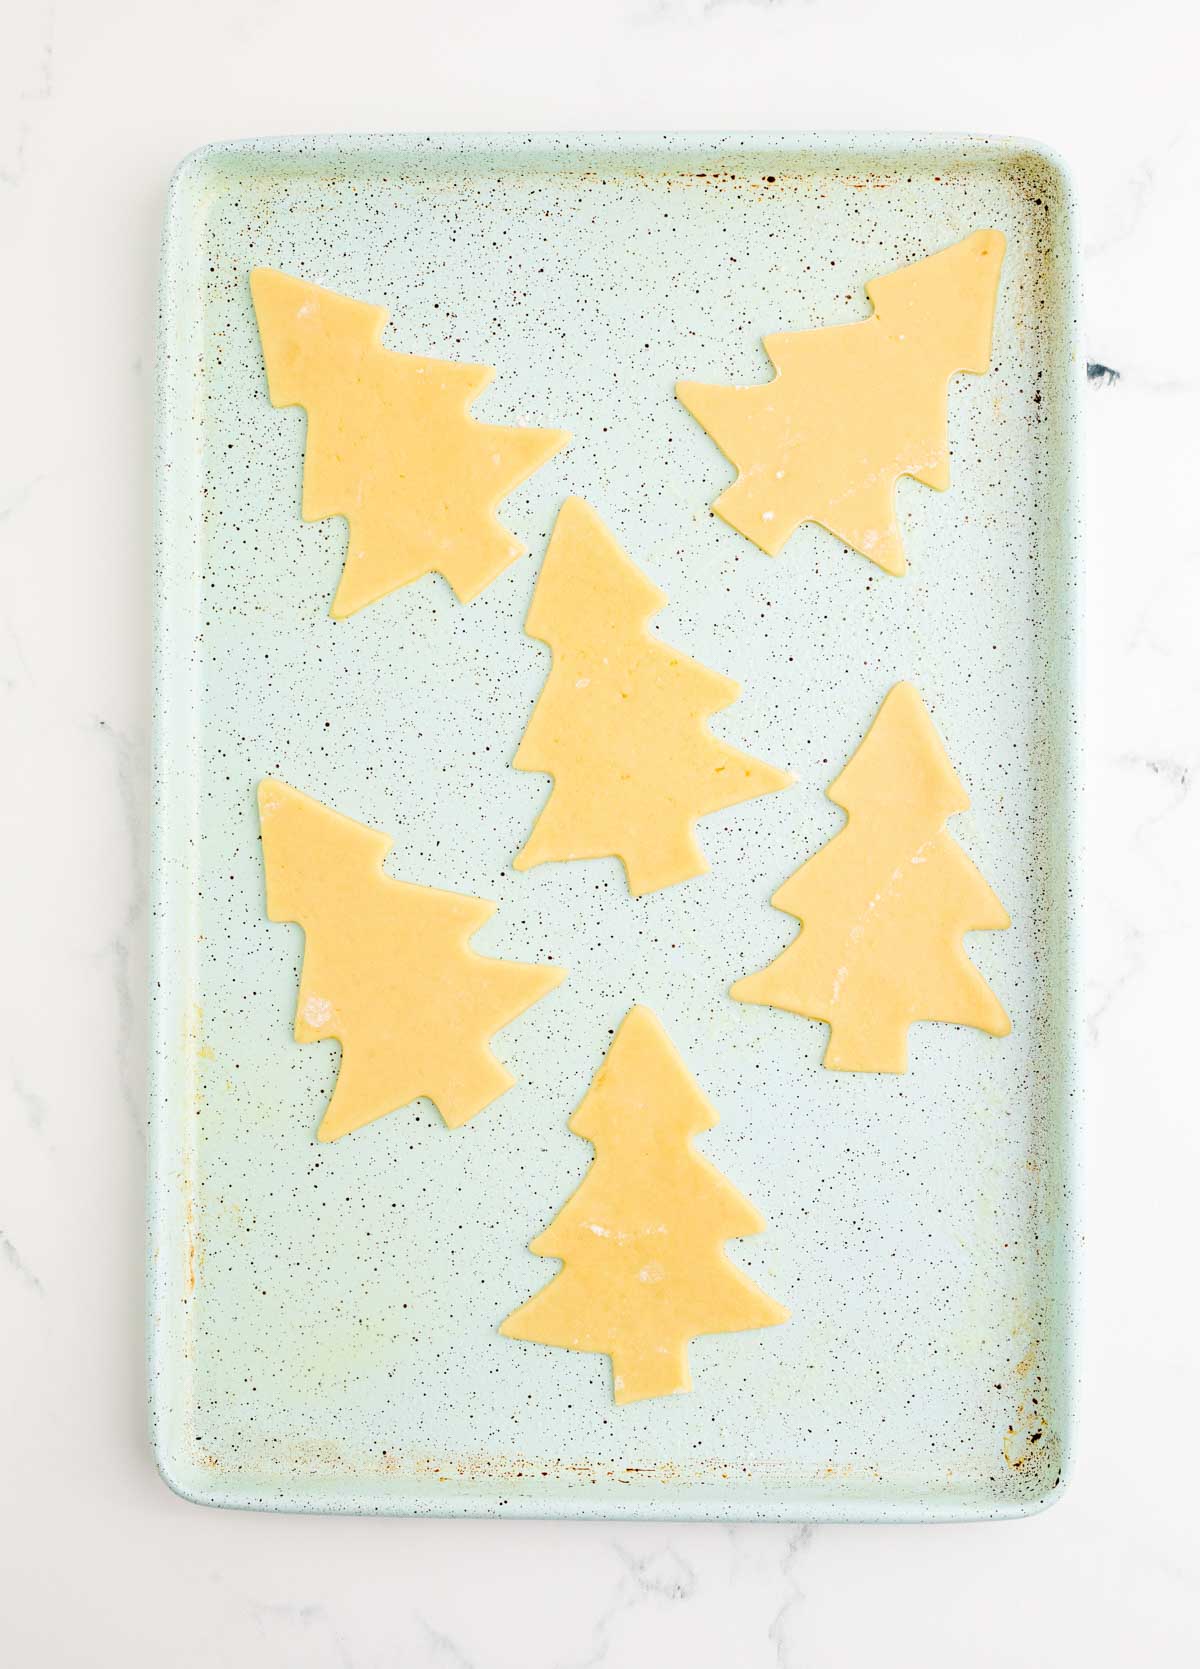 unbaked Christmas tree cookies on a baking sheet